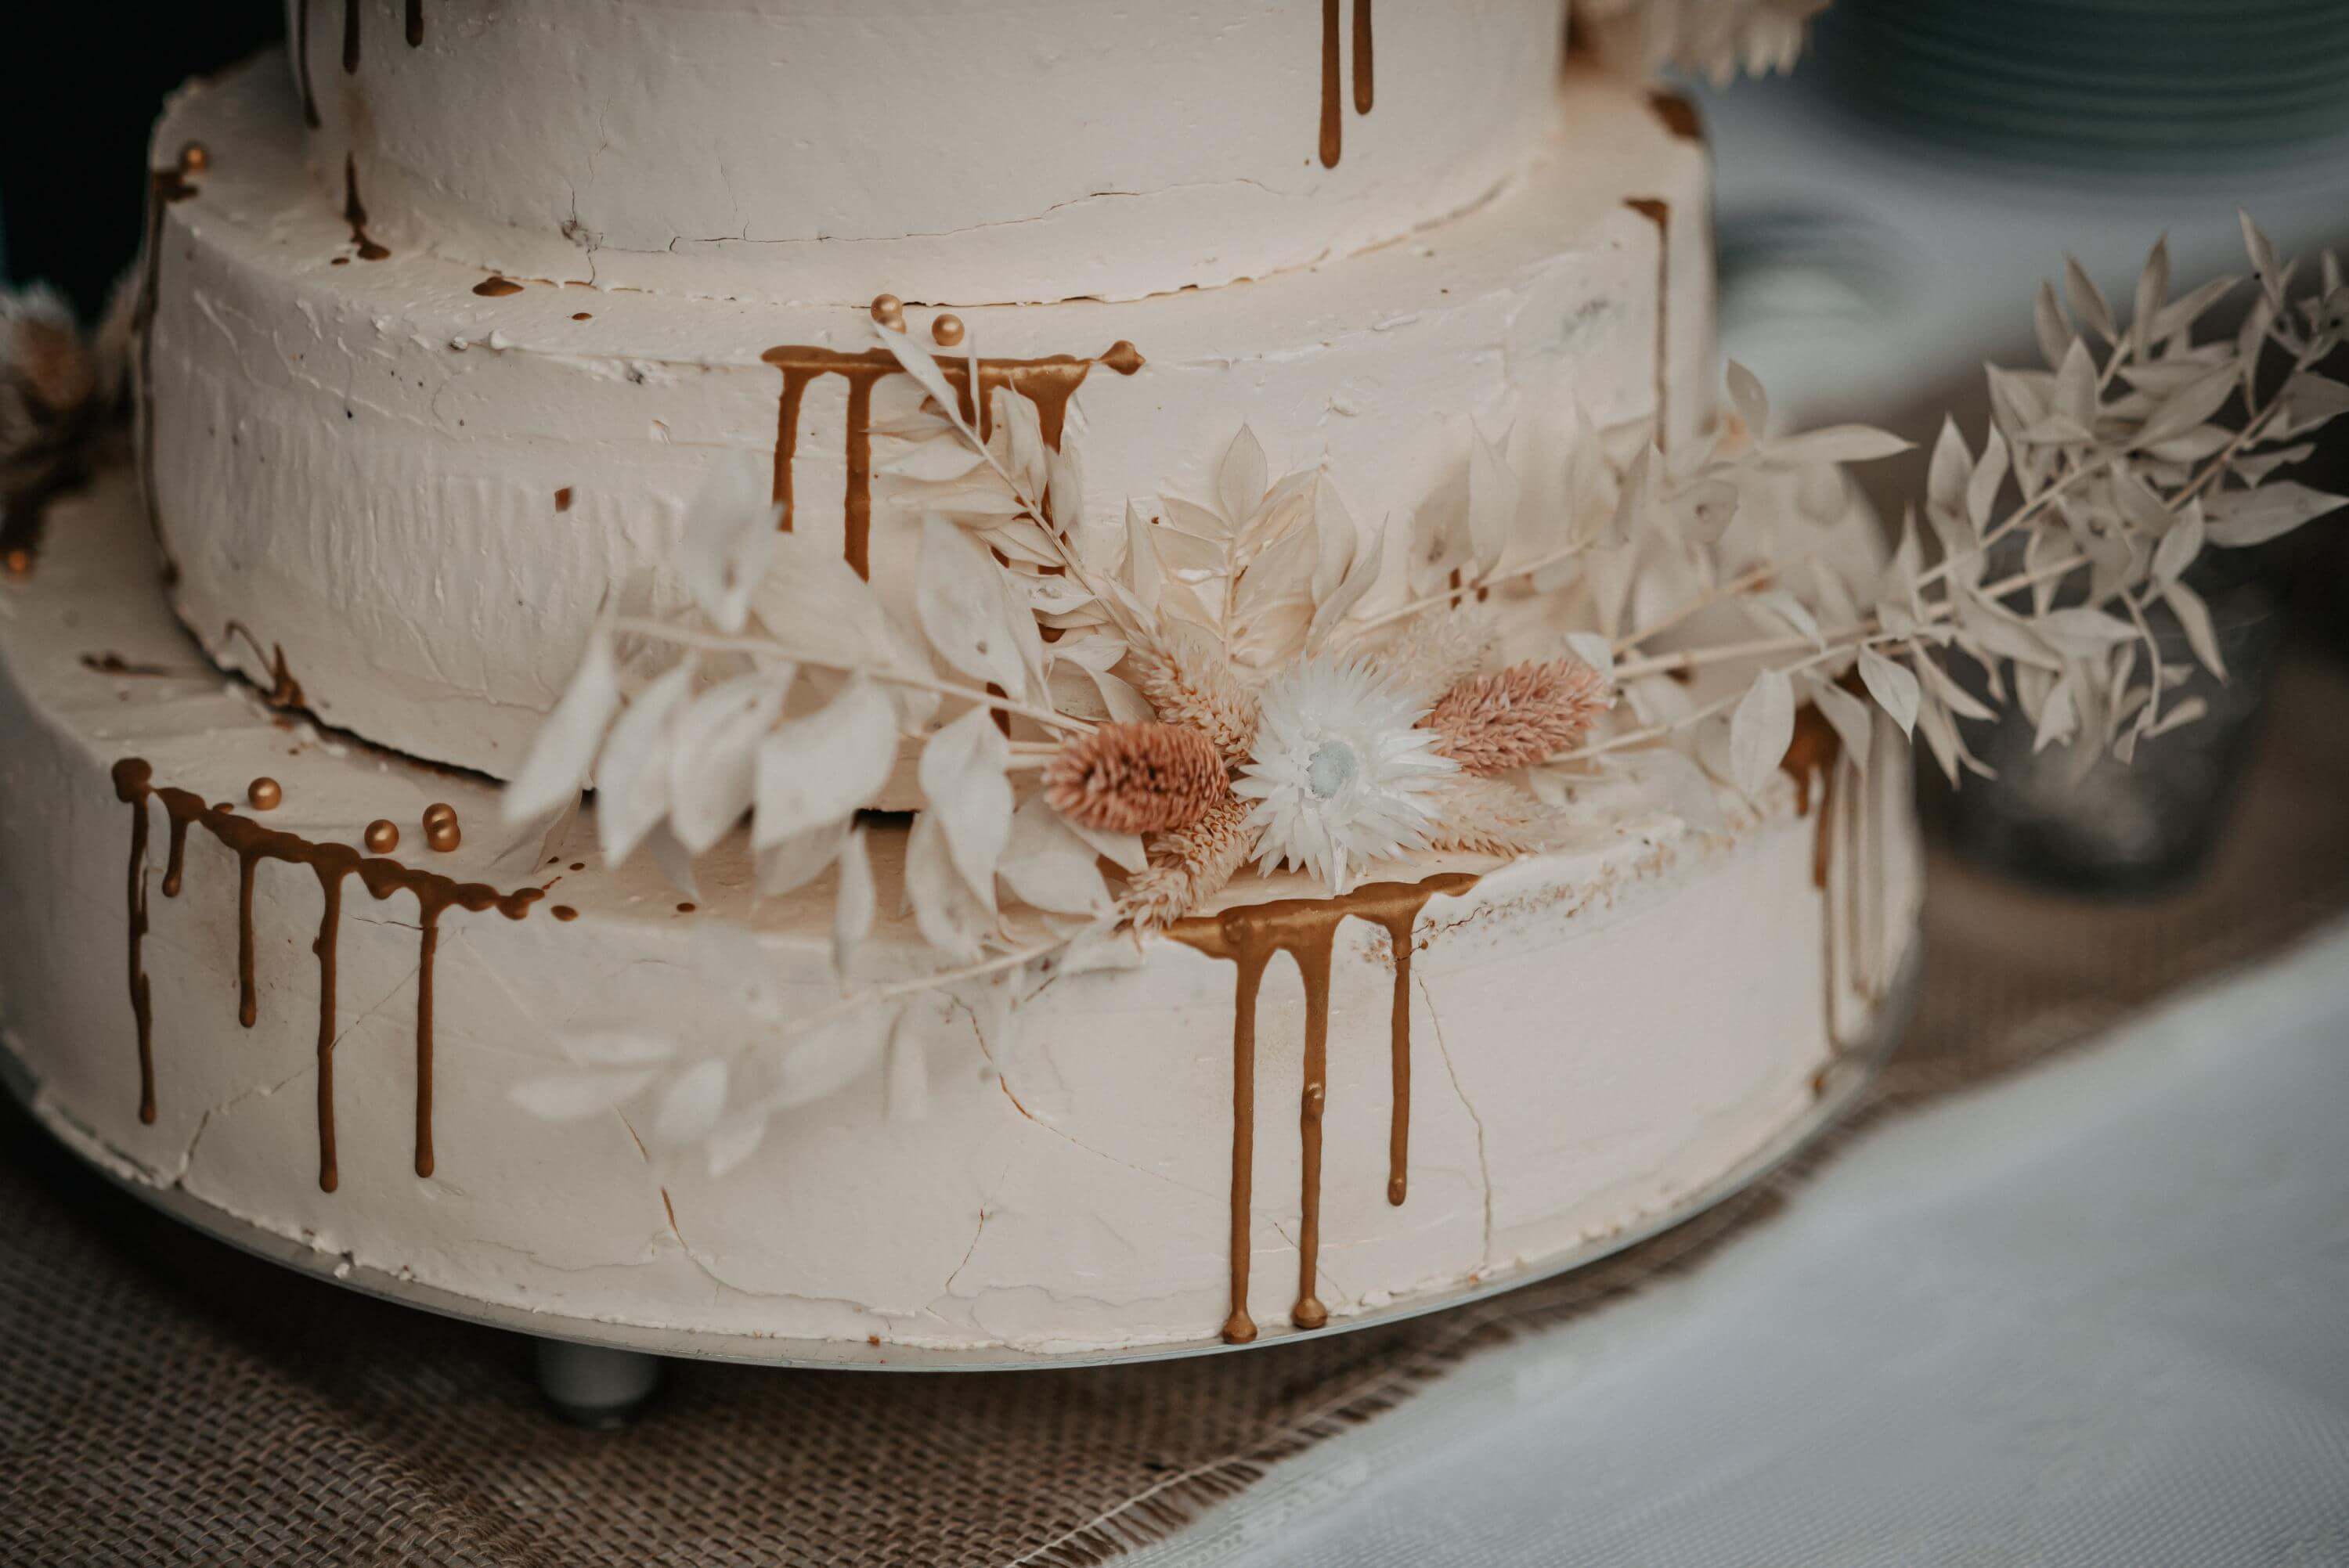 A three tier buttercream wedding cake is decorated in drip cake style and ready to be eaten.